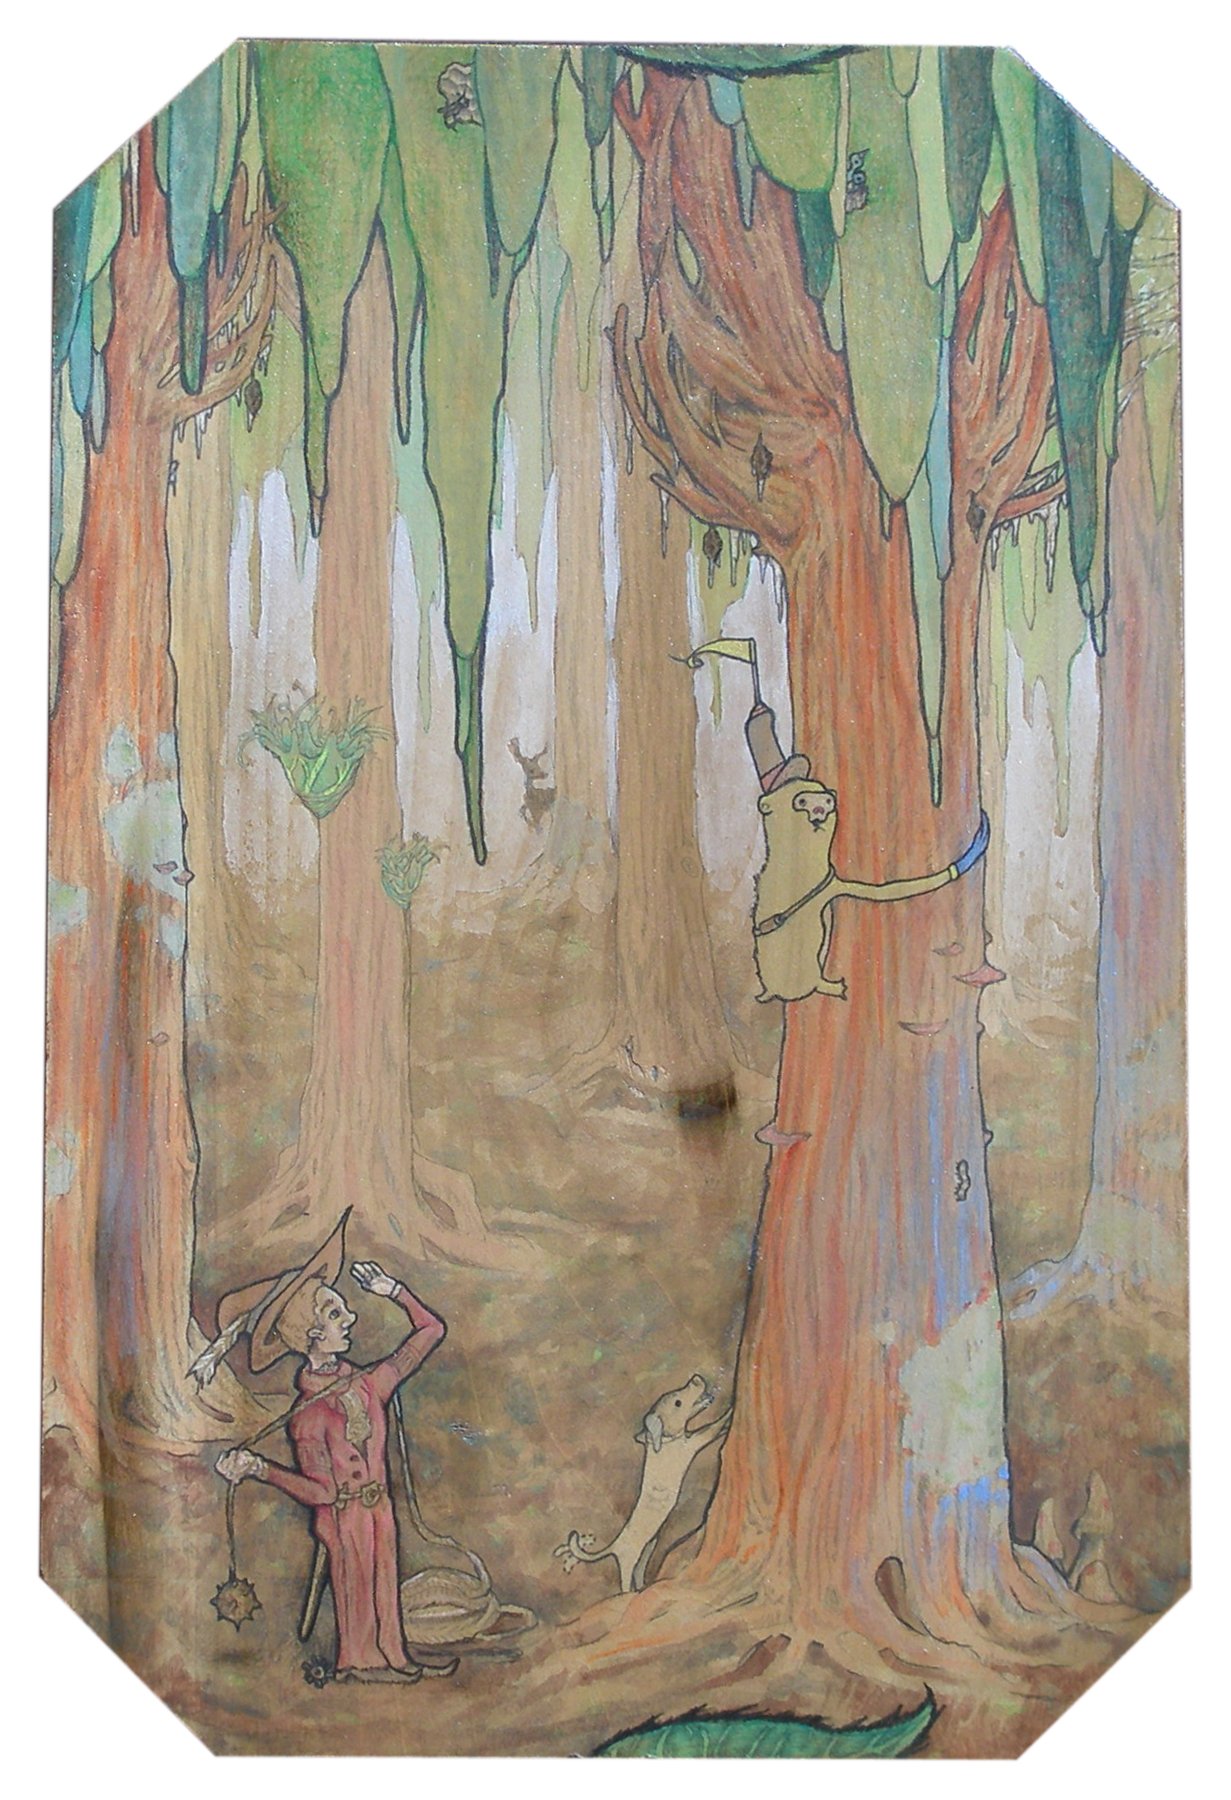   Hunter  acrylic , graphite, color pencil on poplar. 2010    owned by Private Collector    exhibited -  Bailey Contemporary Arts during Anything And Everything From The Past 2022  